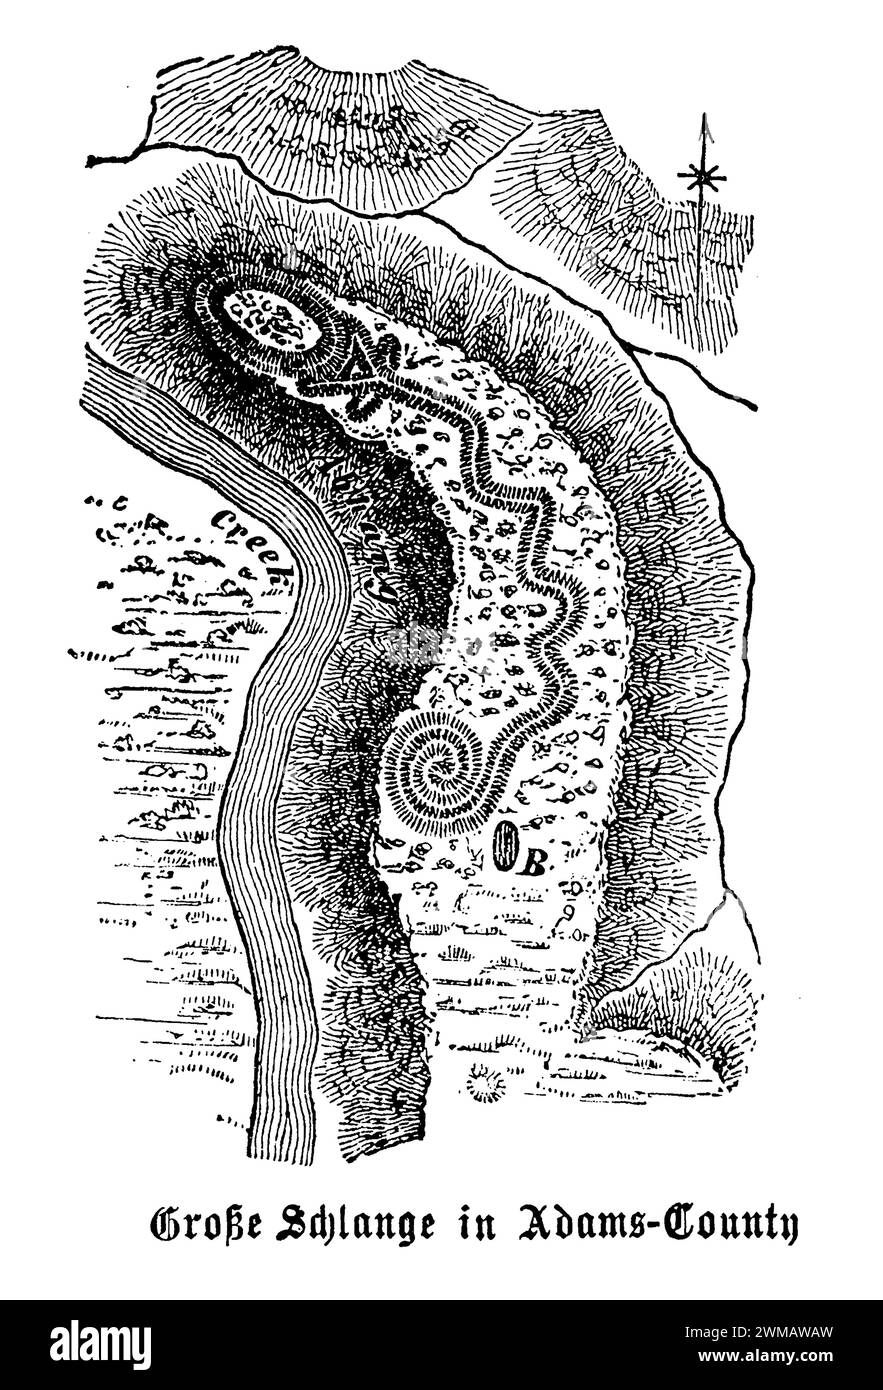 he Great Serpent Mound in Adams County, near Peebles, Ohio, is one of the most remarkable and mysterious prehistoric effigy mounds in North America. This ancient earthwork, shaped like a serpent with a coiled tail and an open mouth, stretches over 1,348 feet in length and varies in height from 1 to 3 feet. It is thought to have been constructed by the Indigenous peoples of the Adena culture around 1000 BCE to 300 CE, although later studies suggest that the Fort Ancient culture (1000-1650 CE) could have been responsible for its creation or modification Stock Photo